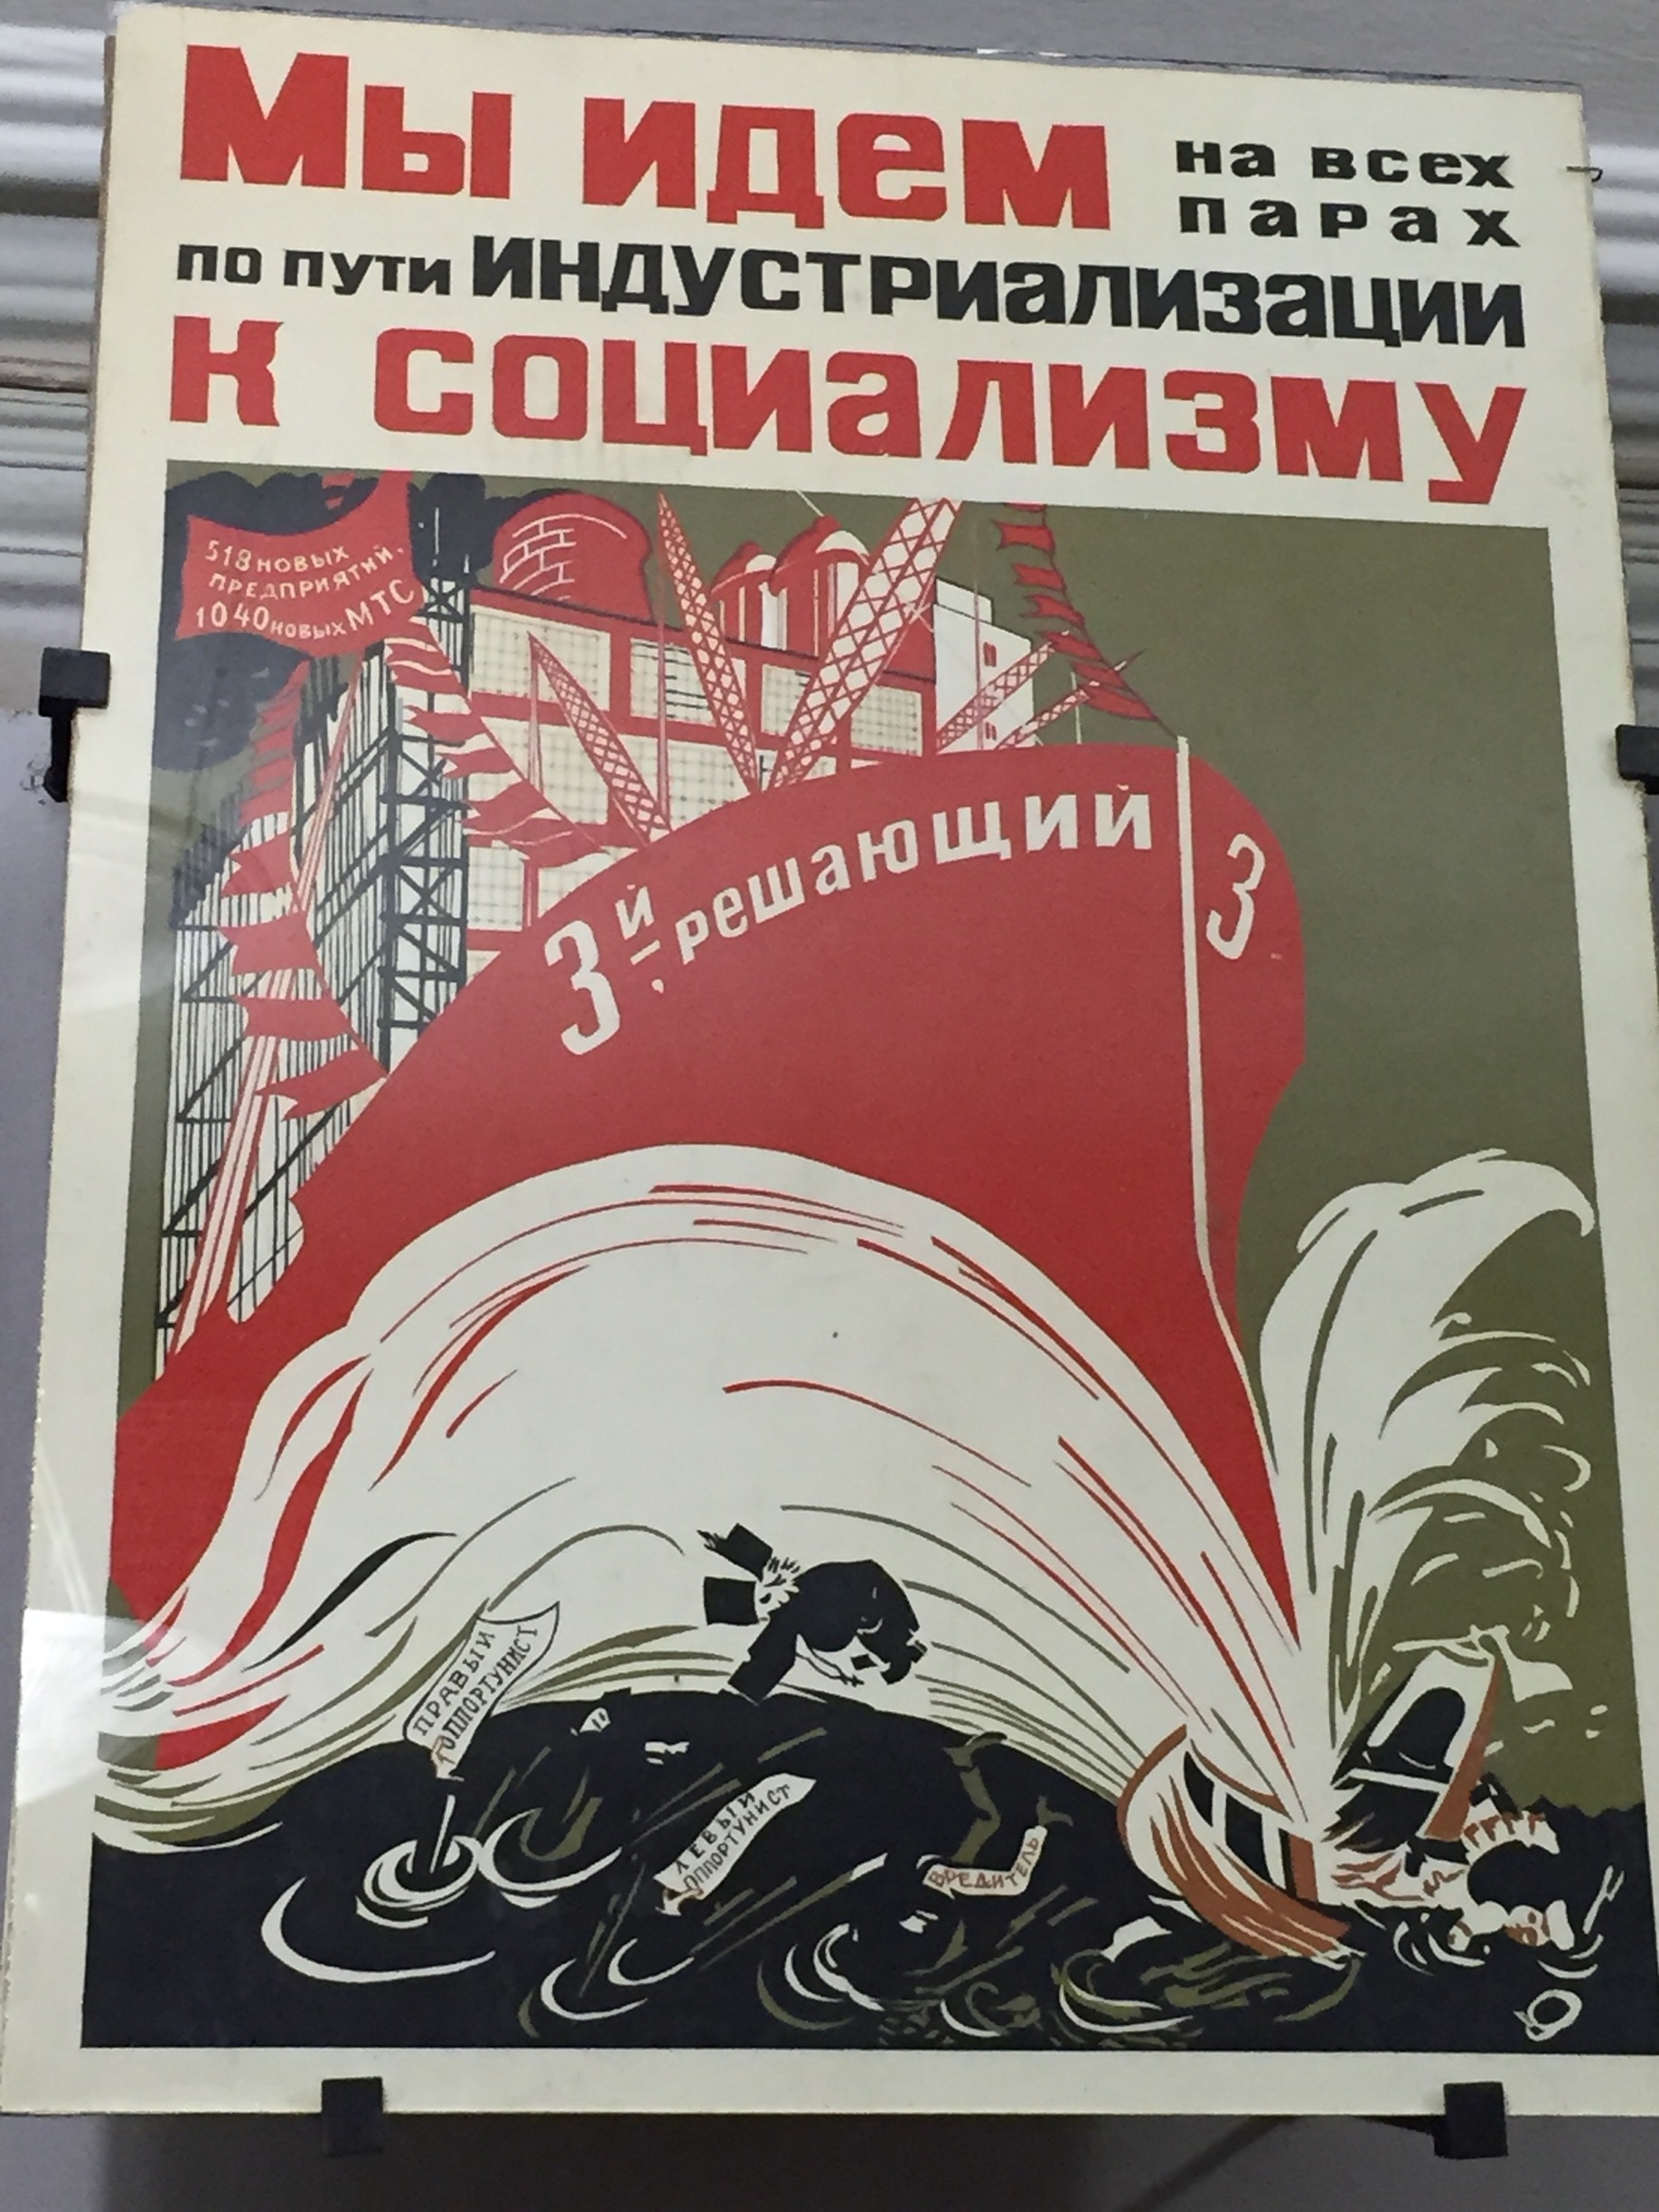 I loved the old propaganda posters in the museum. This one says something about being on the way to industrialization and socialism.